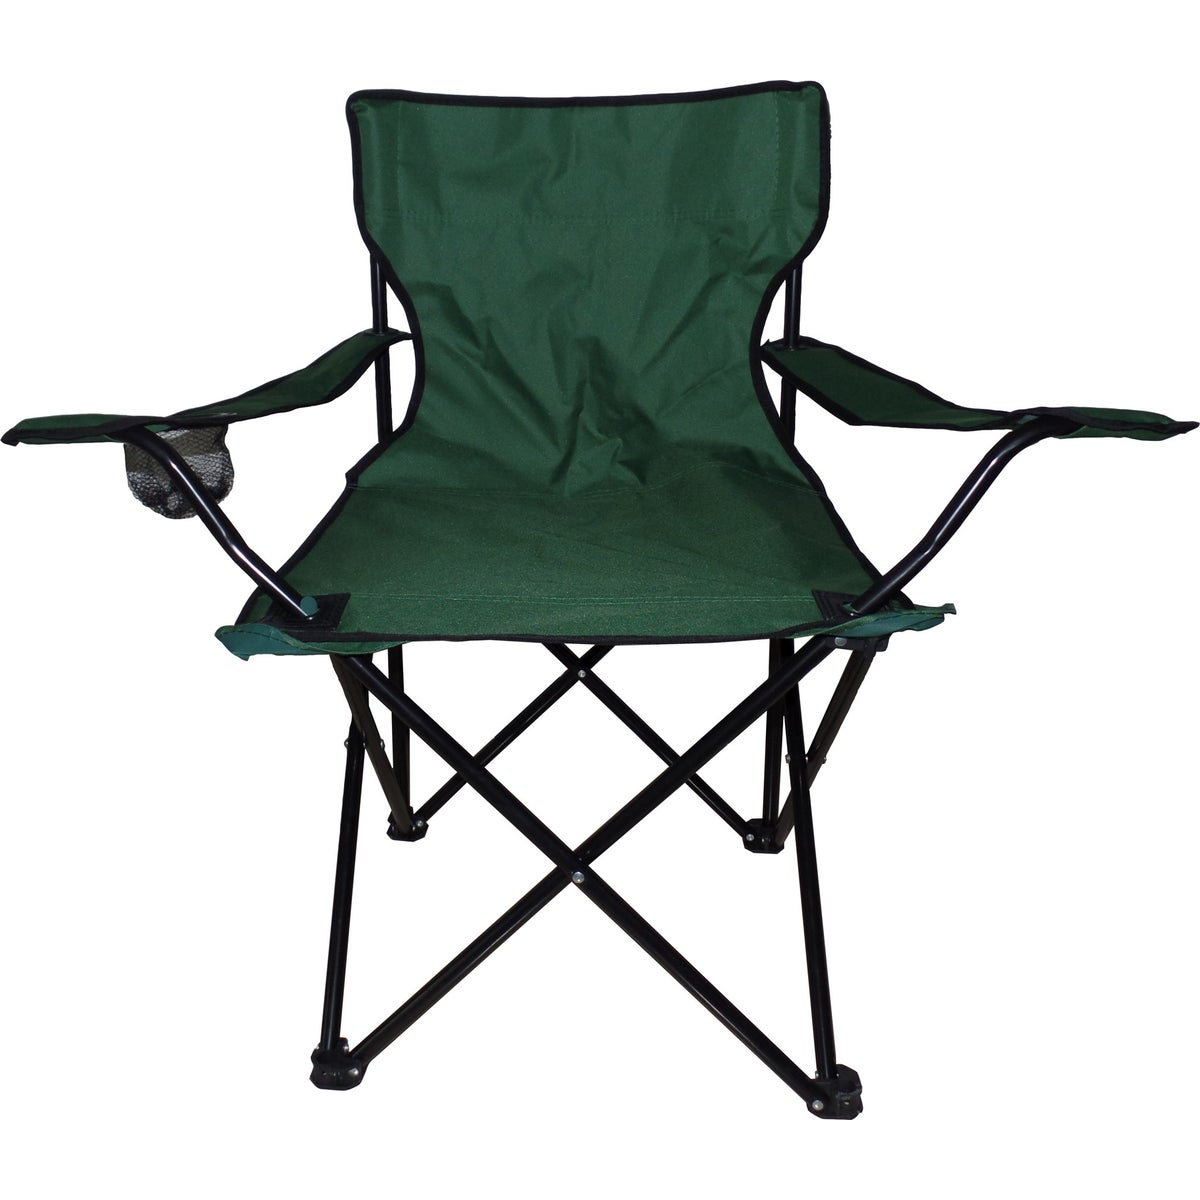 Hunter Green - Large Camping Chair (6)